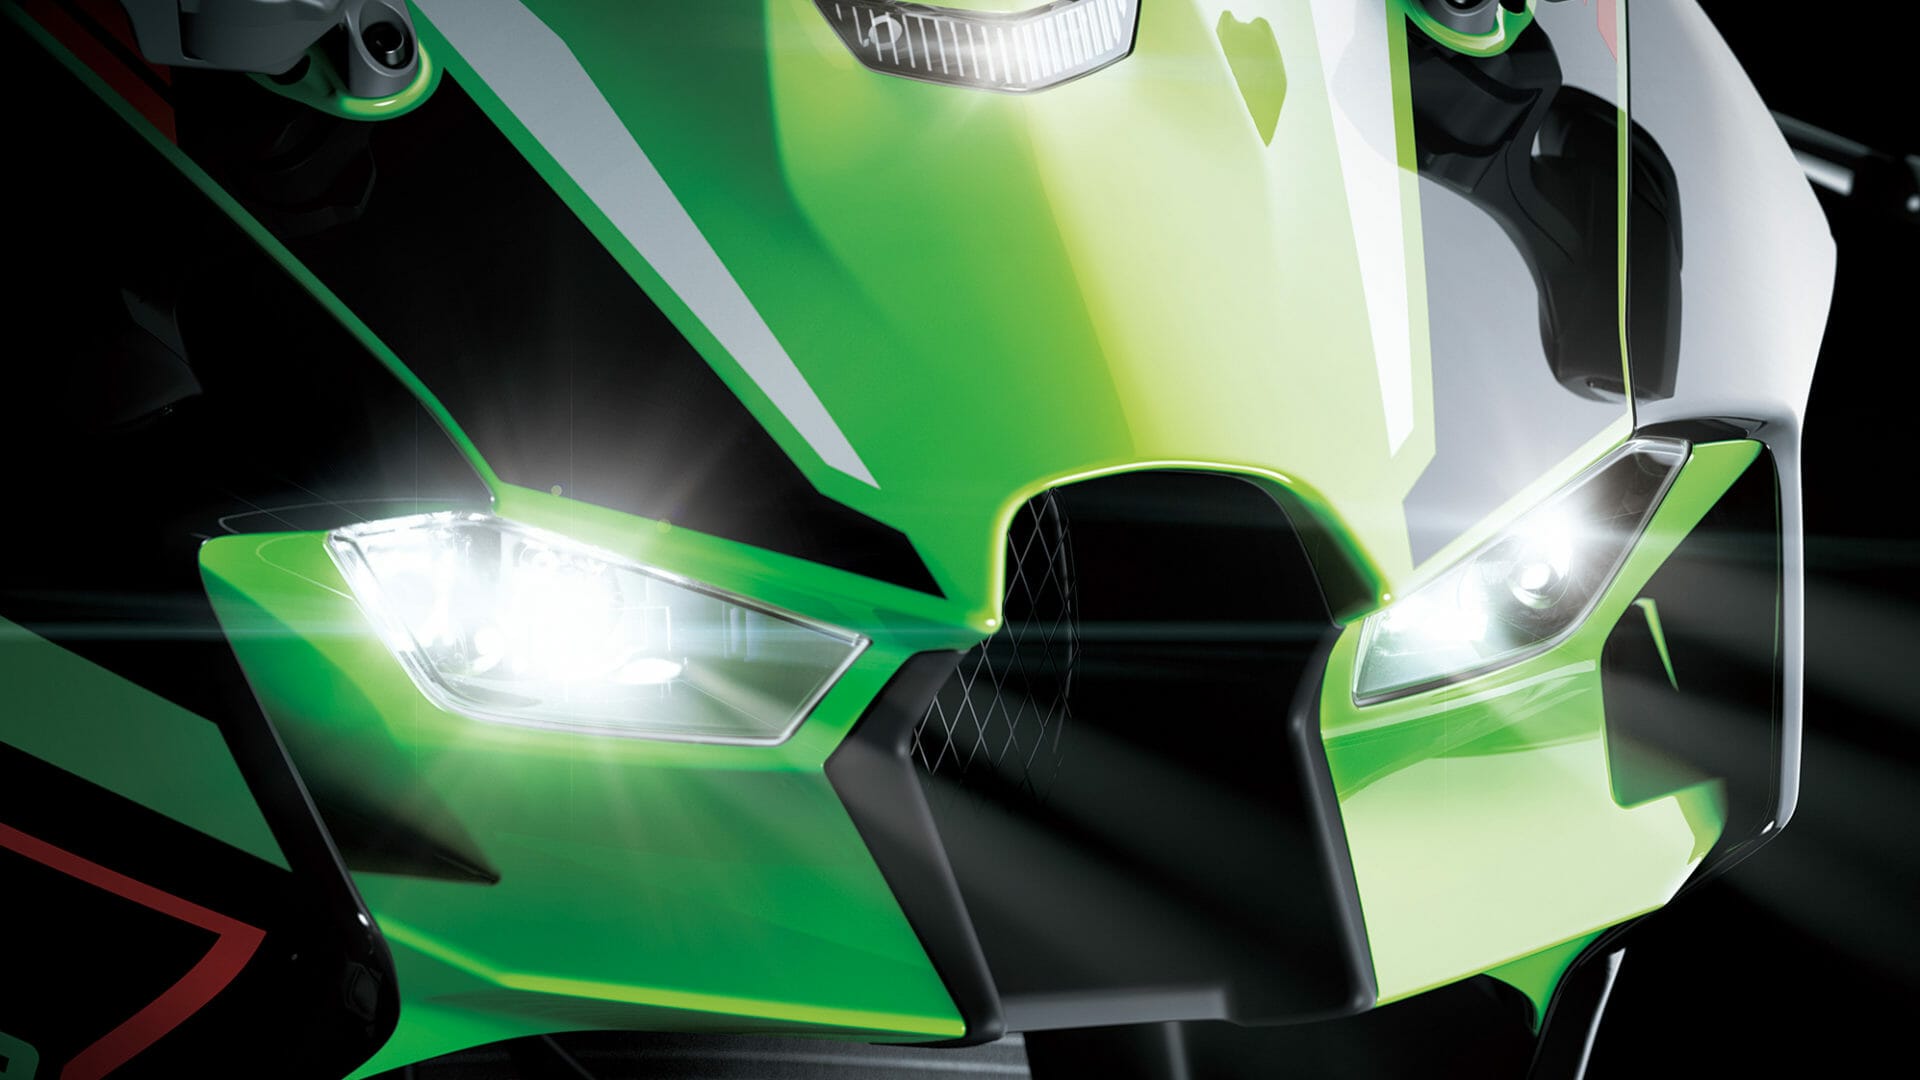 Kawasaki ZX-4R to be presented soon!?
- also in the MOTORCYCLES.NEWS APP